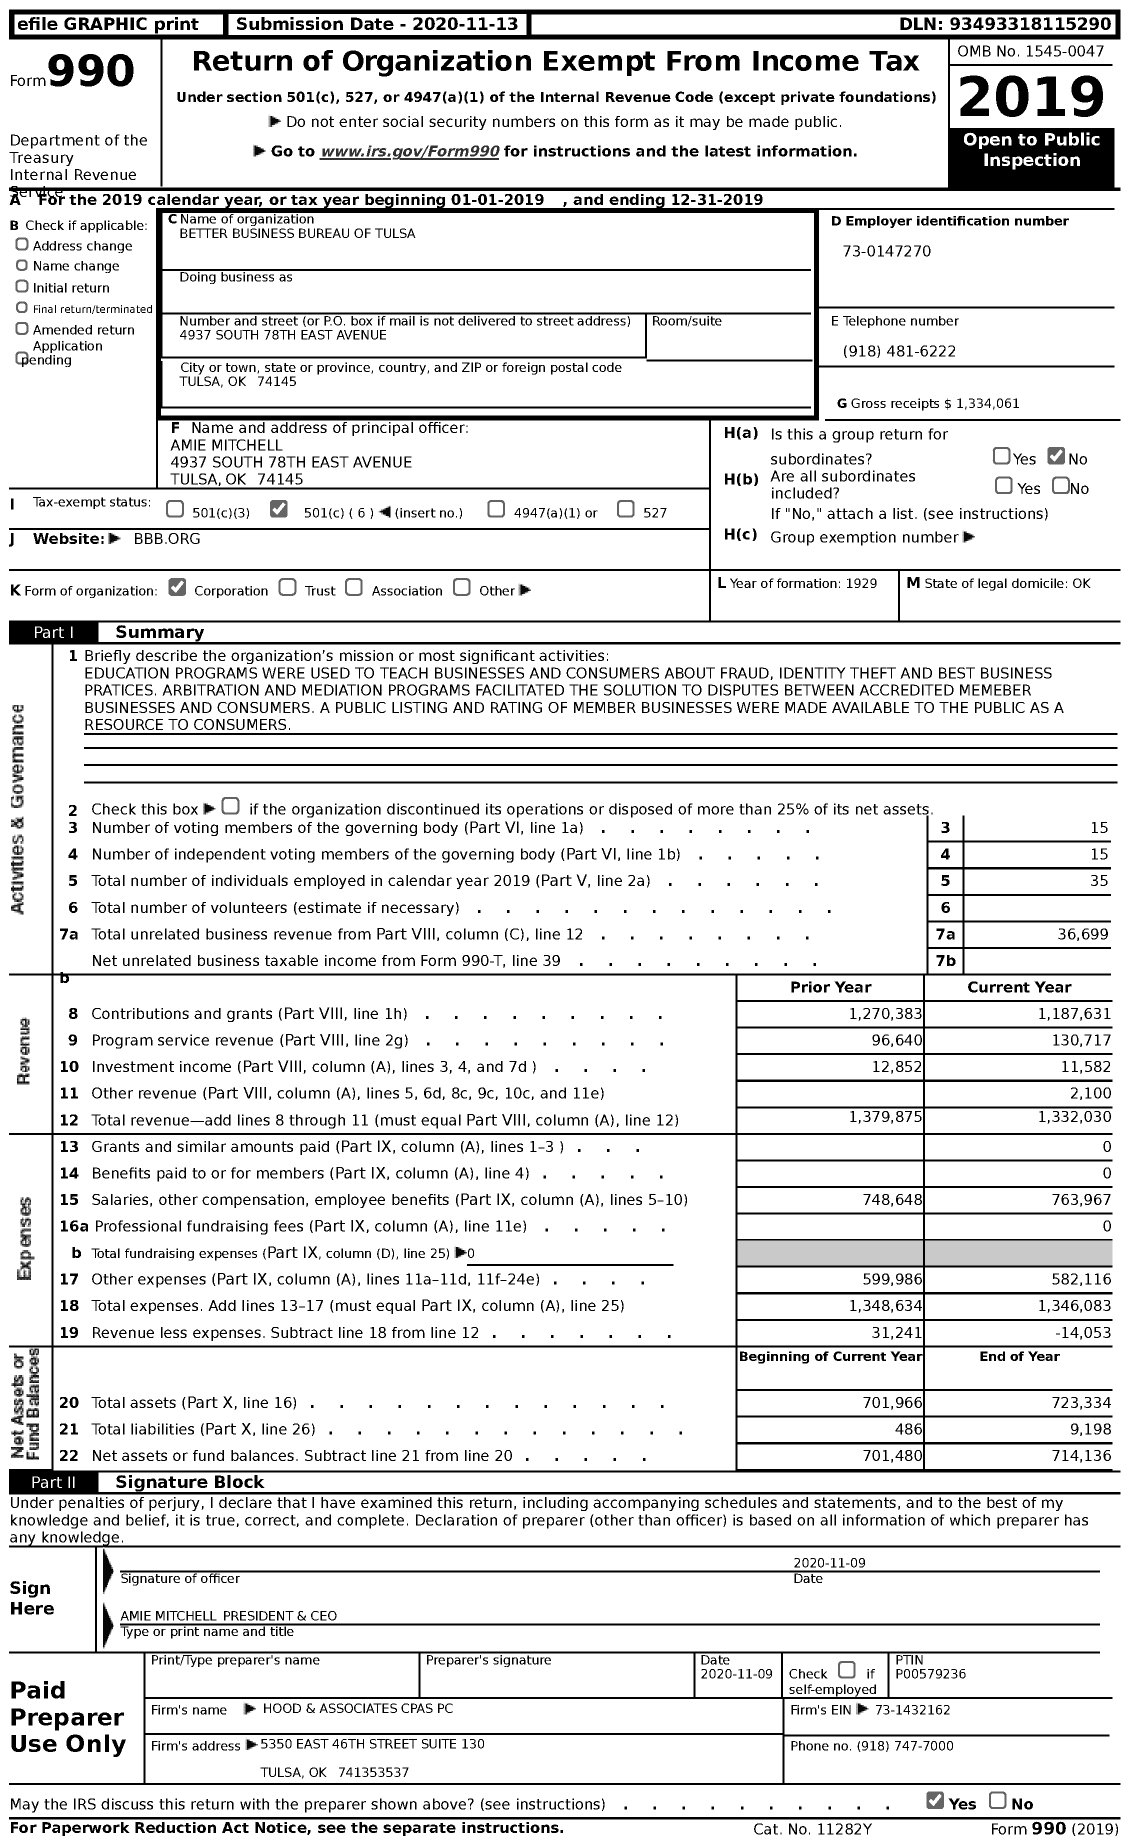 Image of first page of 2019 Form 990 for Better Business Bureau of Tulsa (BBB)